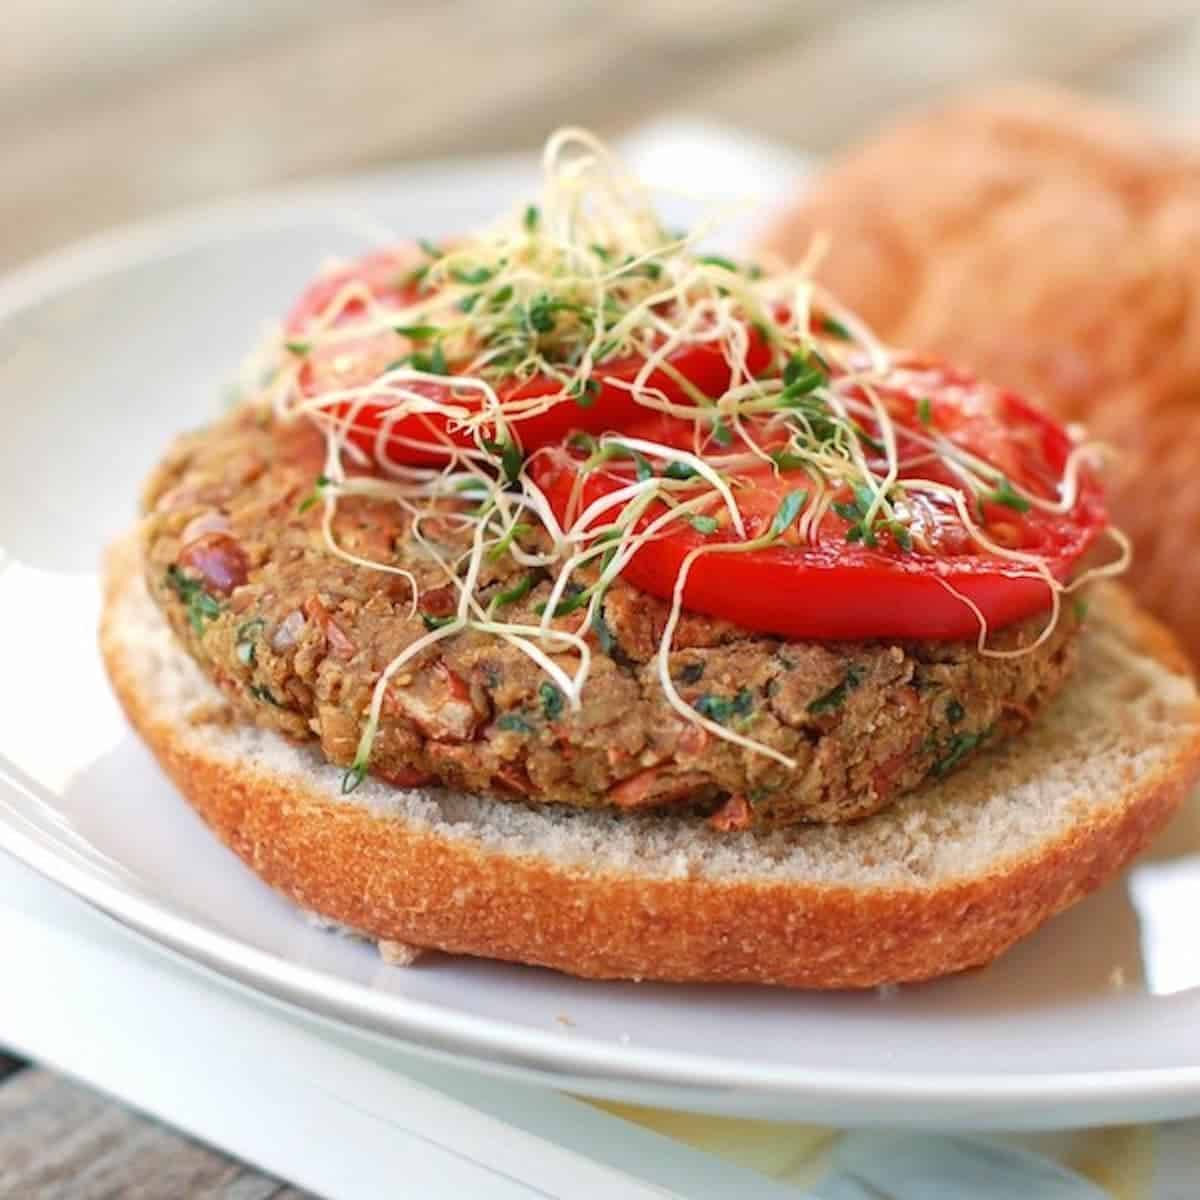 Bean burger with pinto beans, almonds, and sunflower seeds.